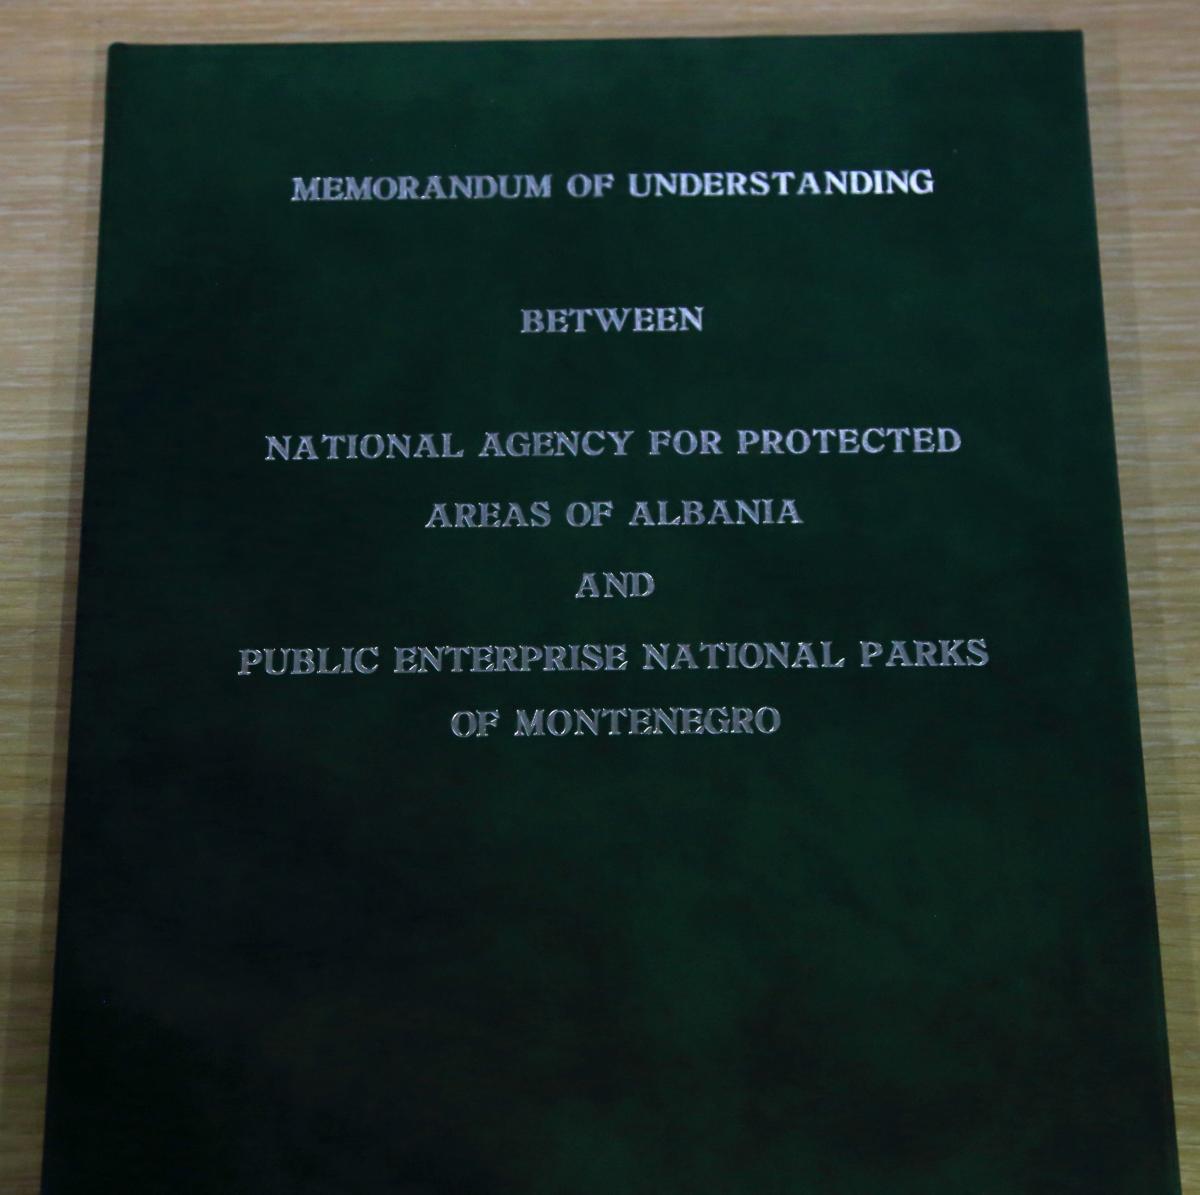 MoU between National Agency for Protected Areas of Albania and Public Enterprise National Parks of Montenegro